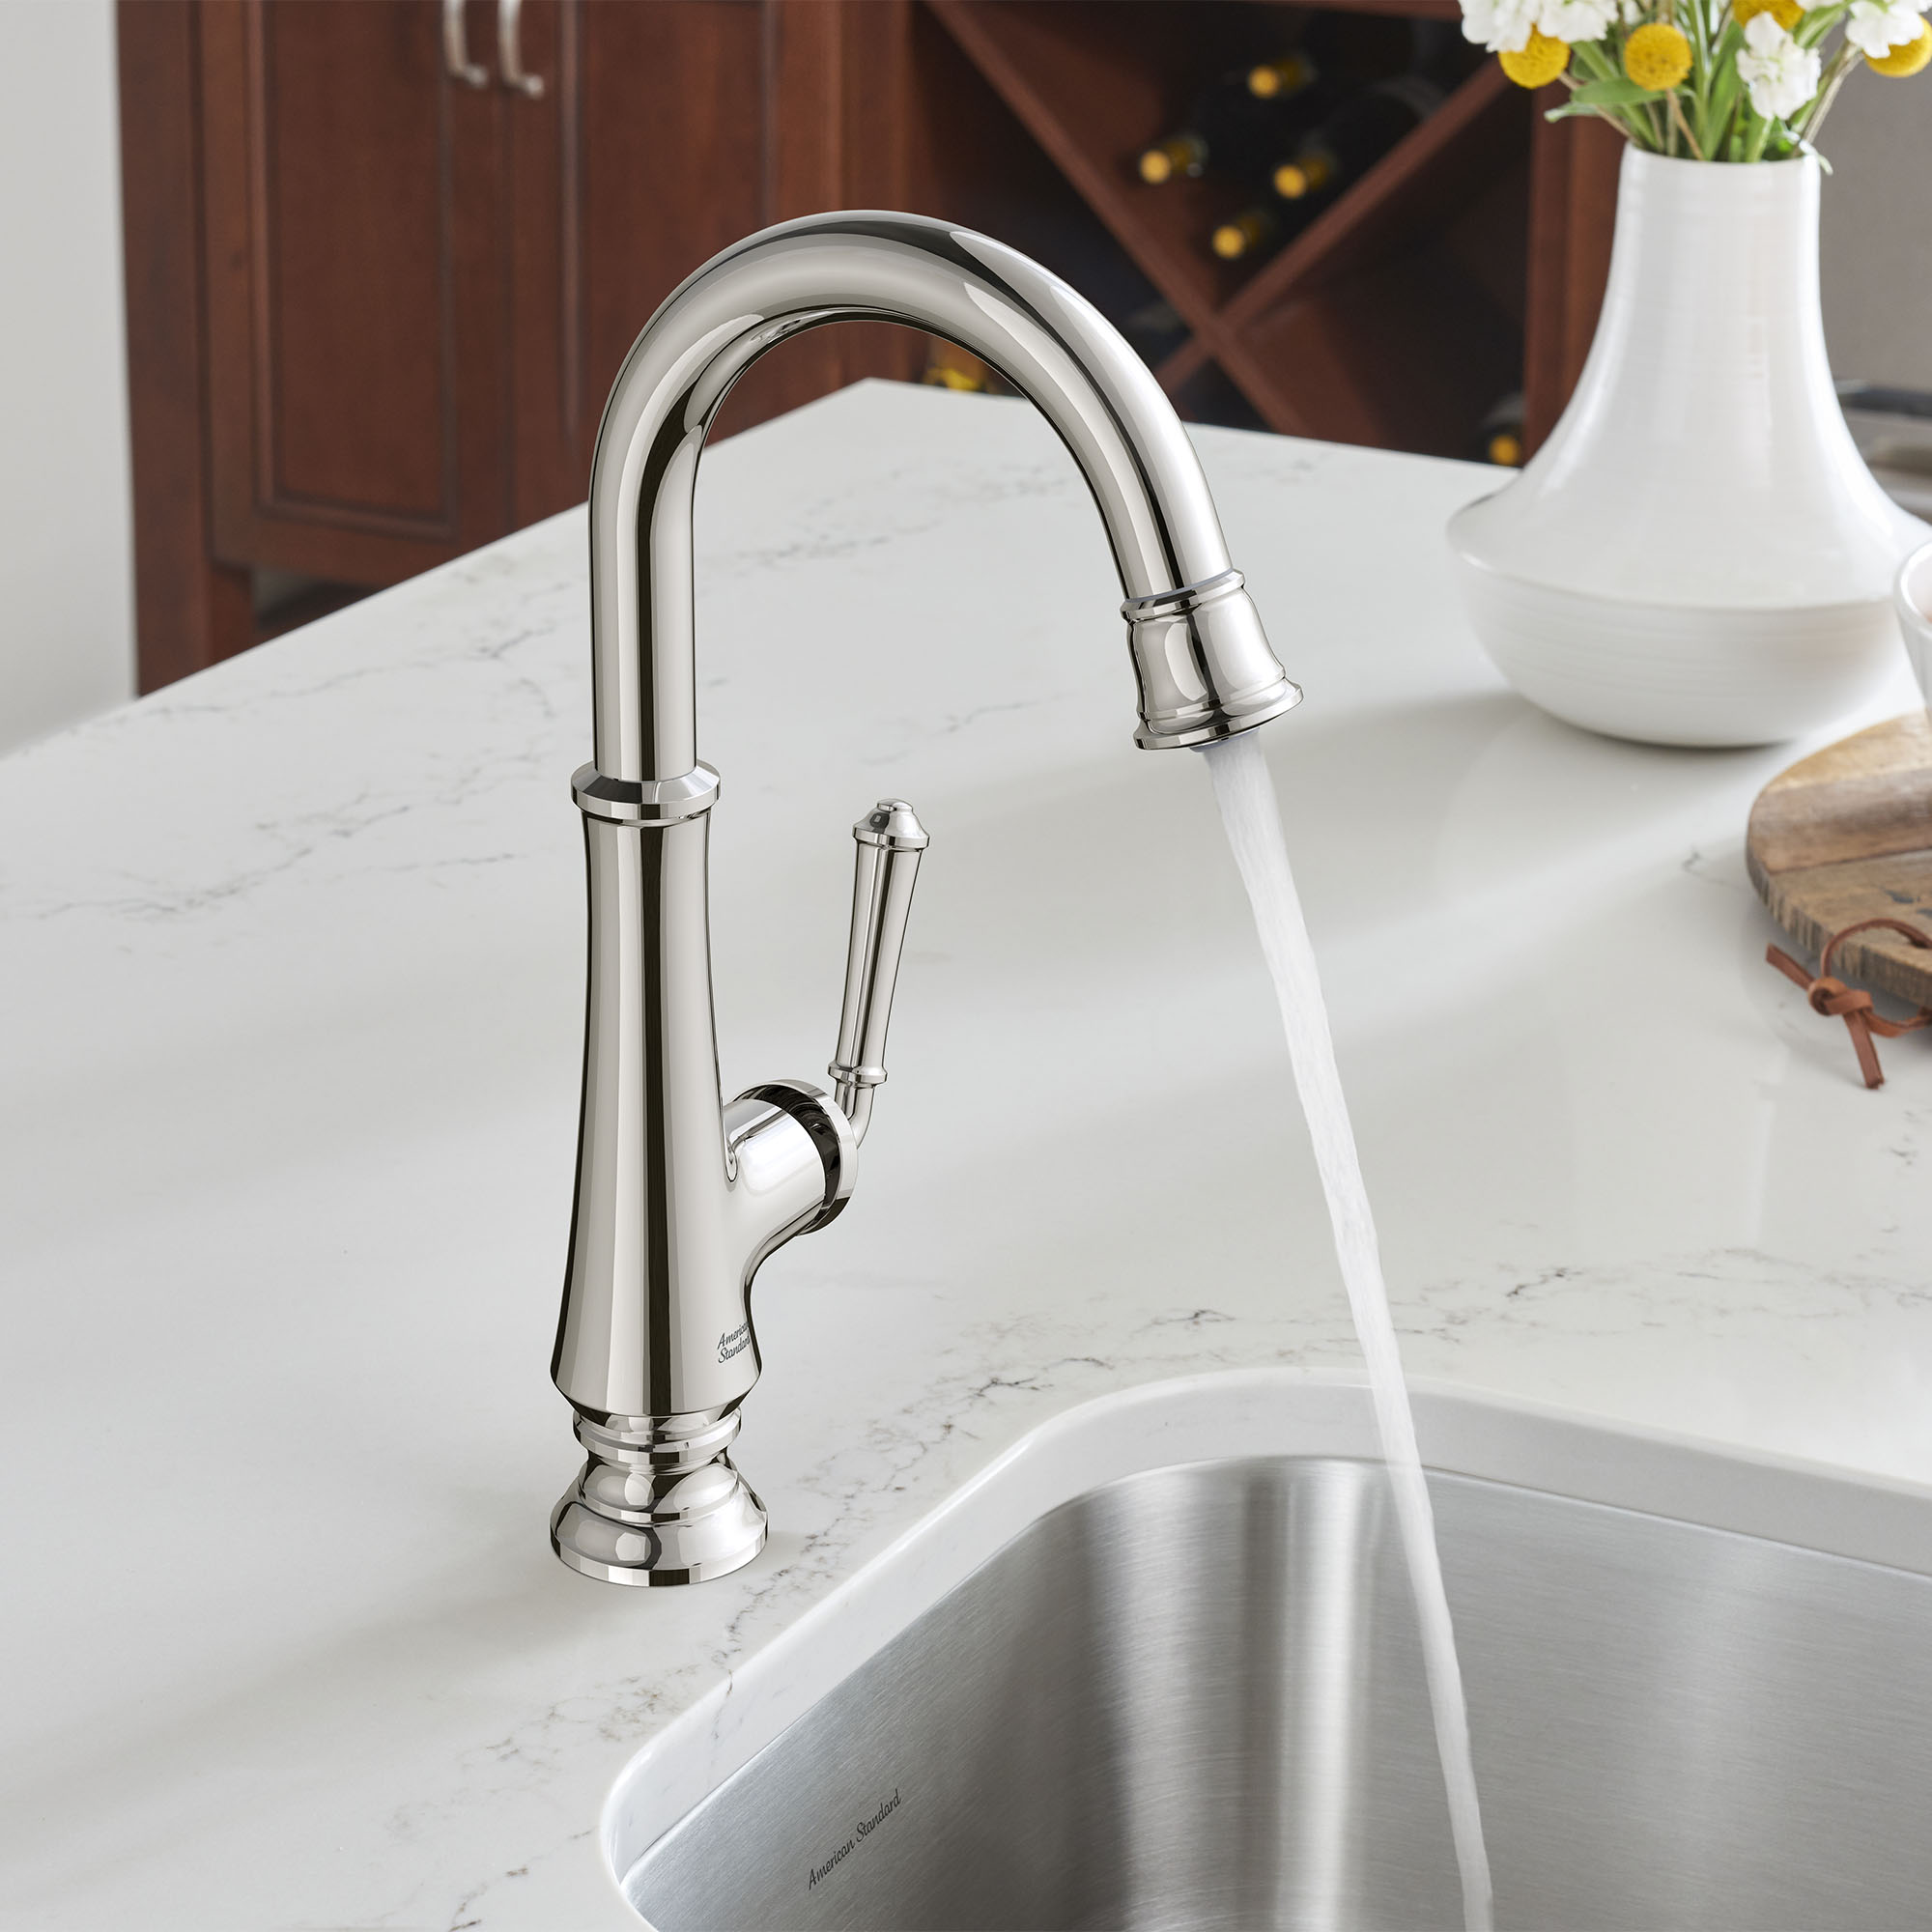 Delancey™ Single-Handle Pull-Down Bar Faucet 1.5 gpm/5.7 L/min